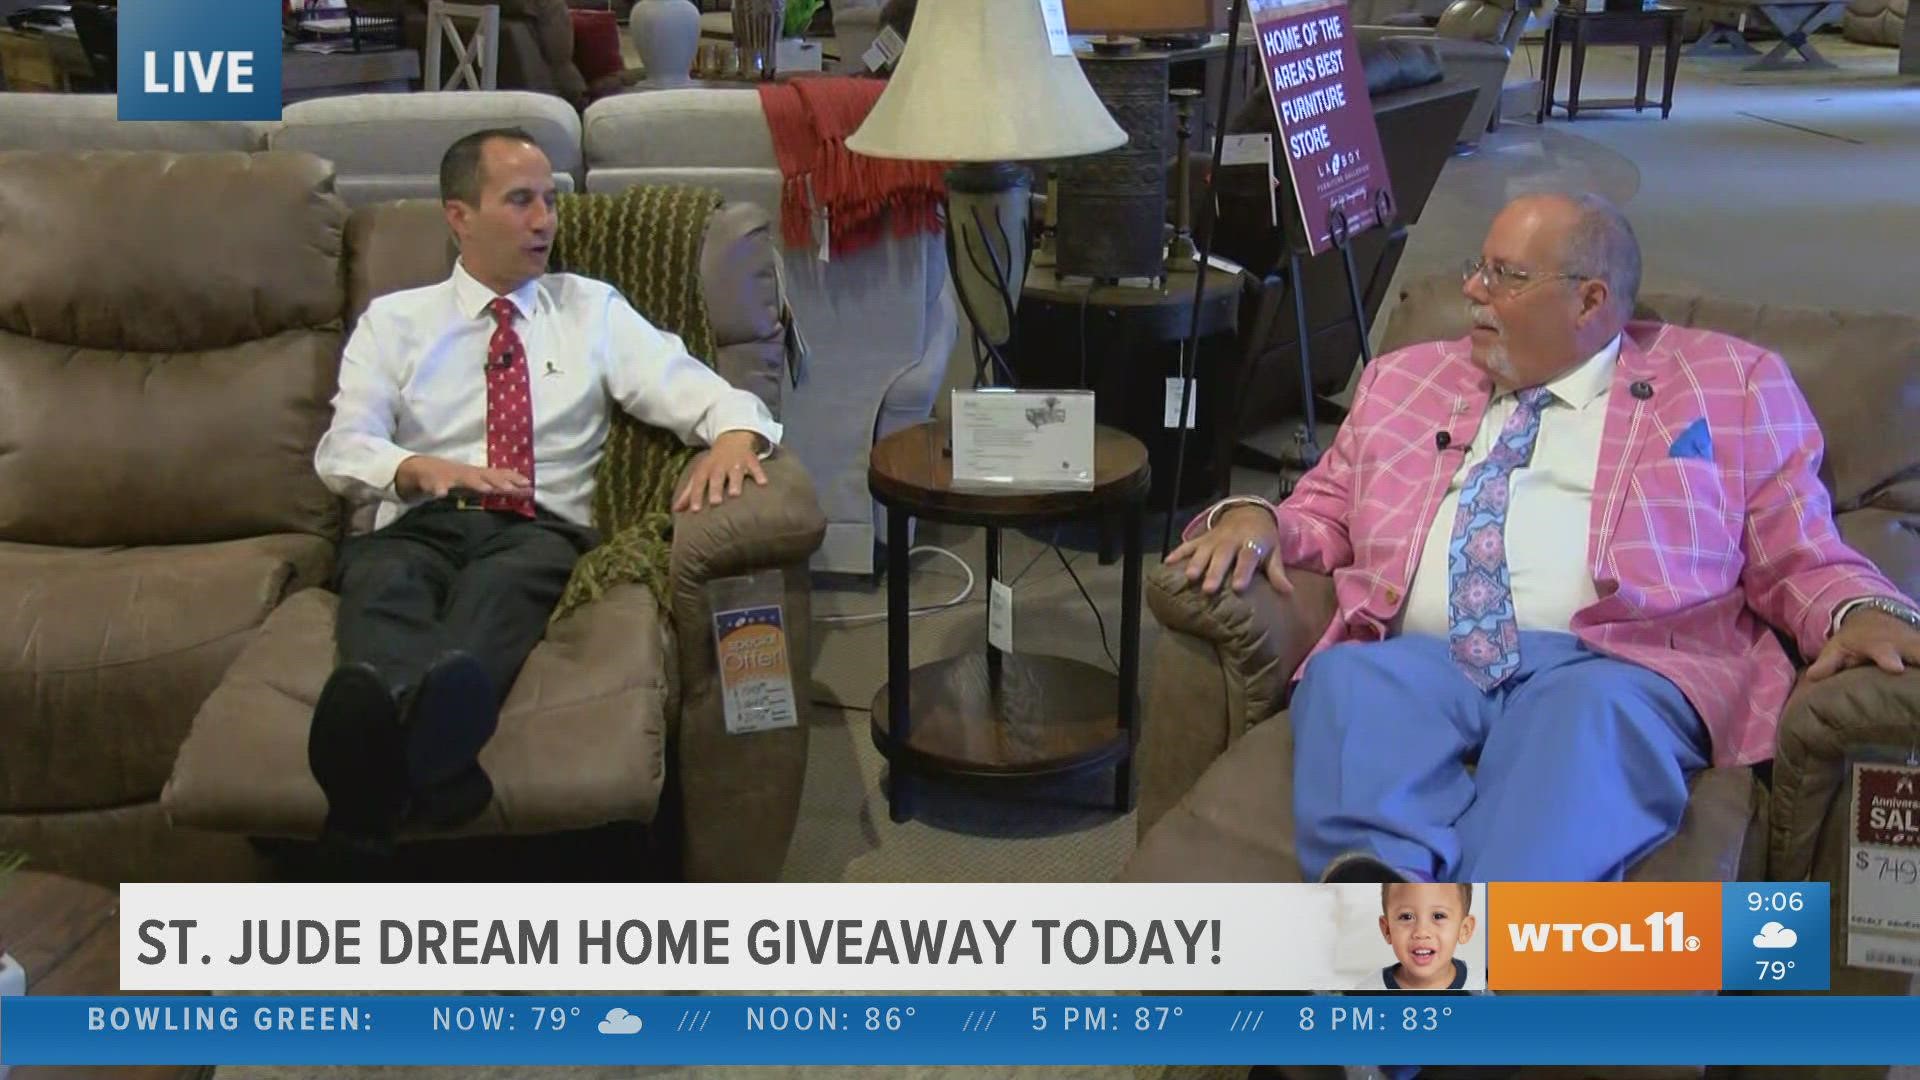 It’s the big day: St. Jude Dream Home Giveaway Day! But first, we have to give away some other prizes!